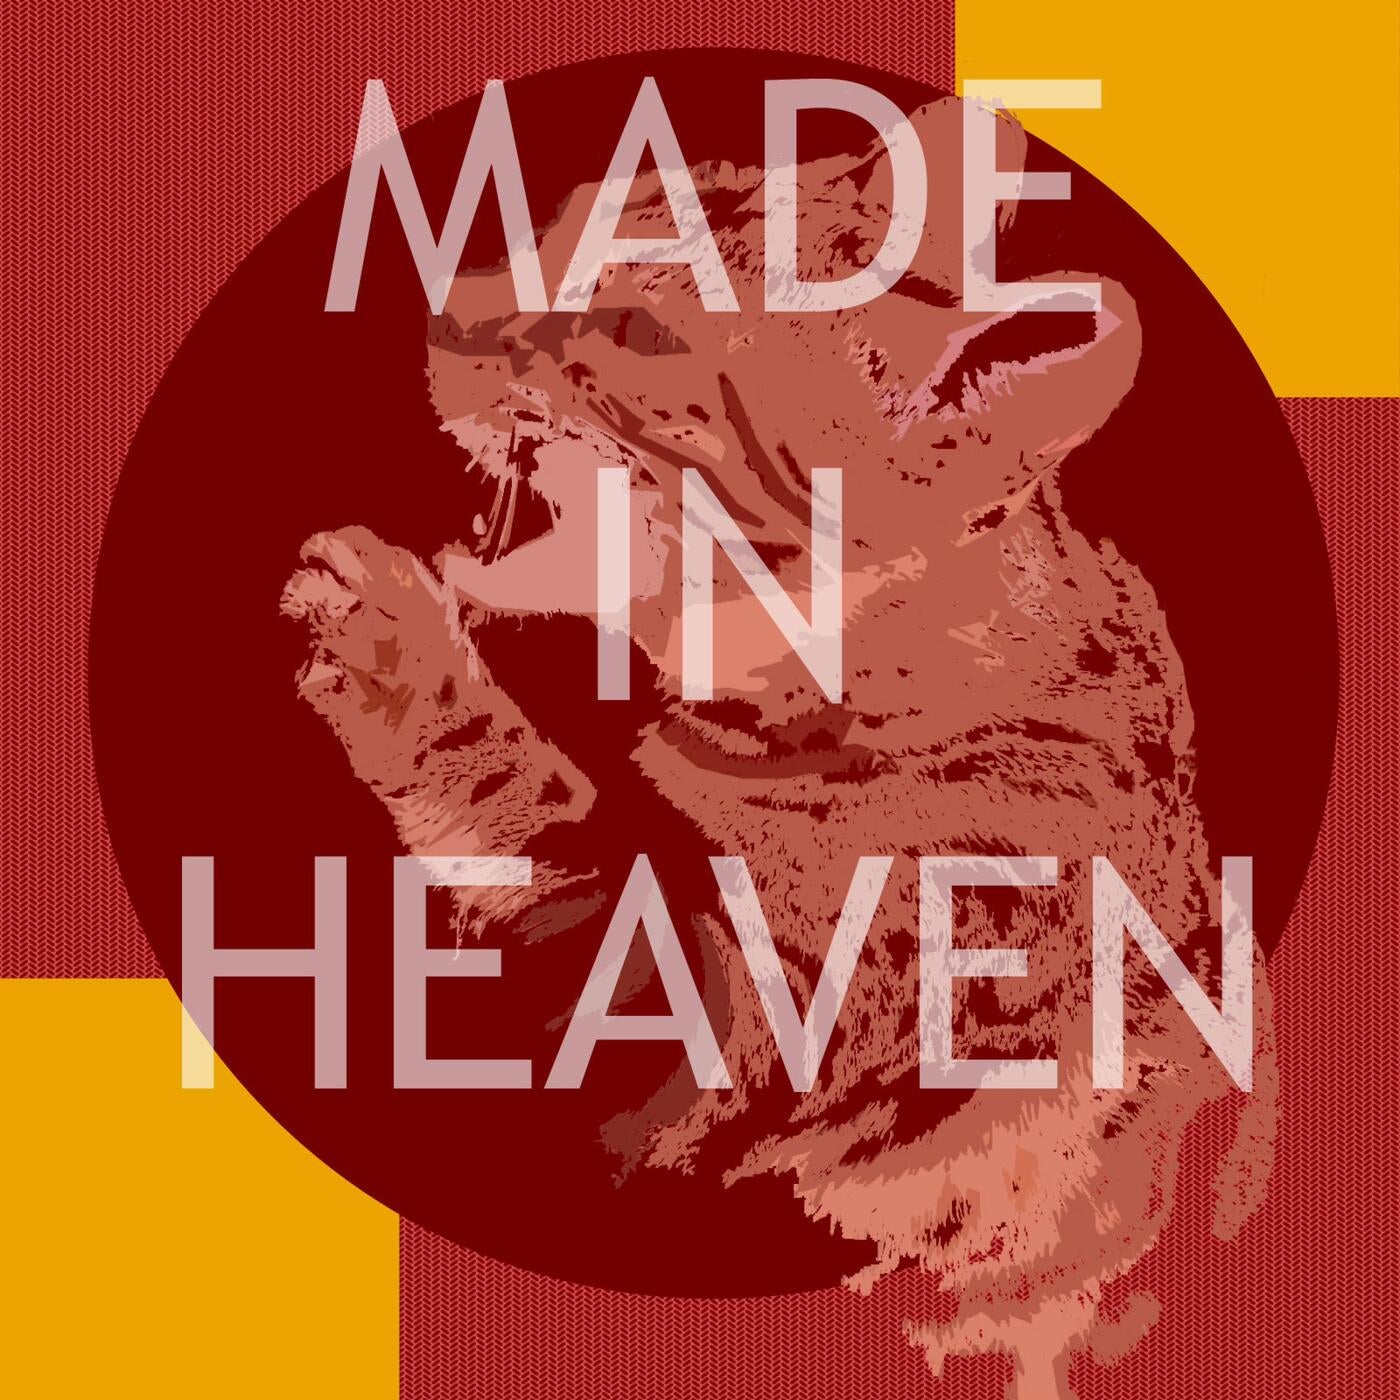 Made In Heaven